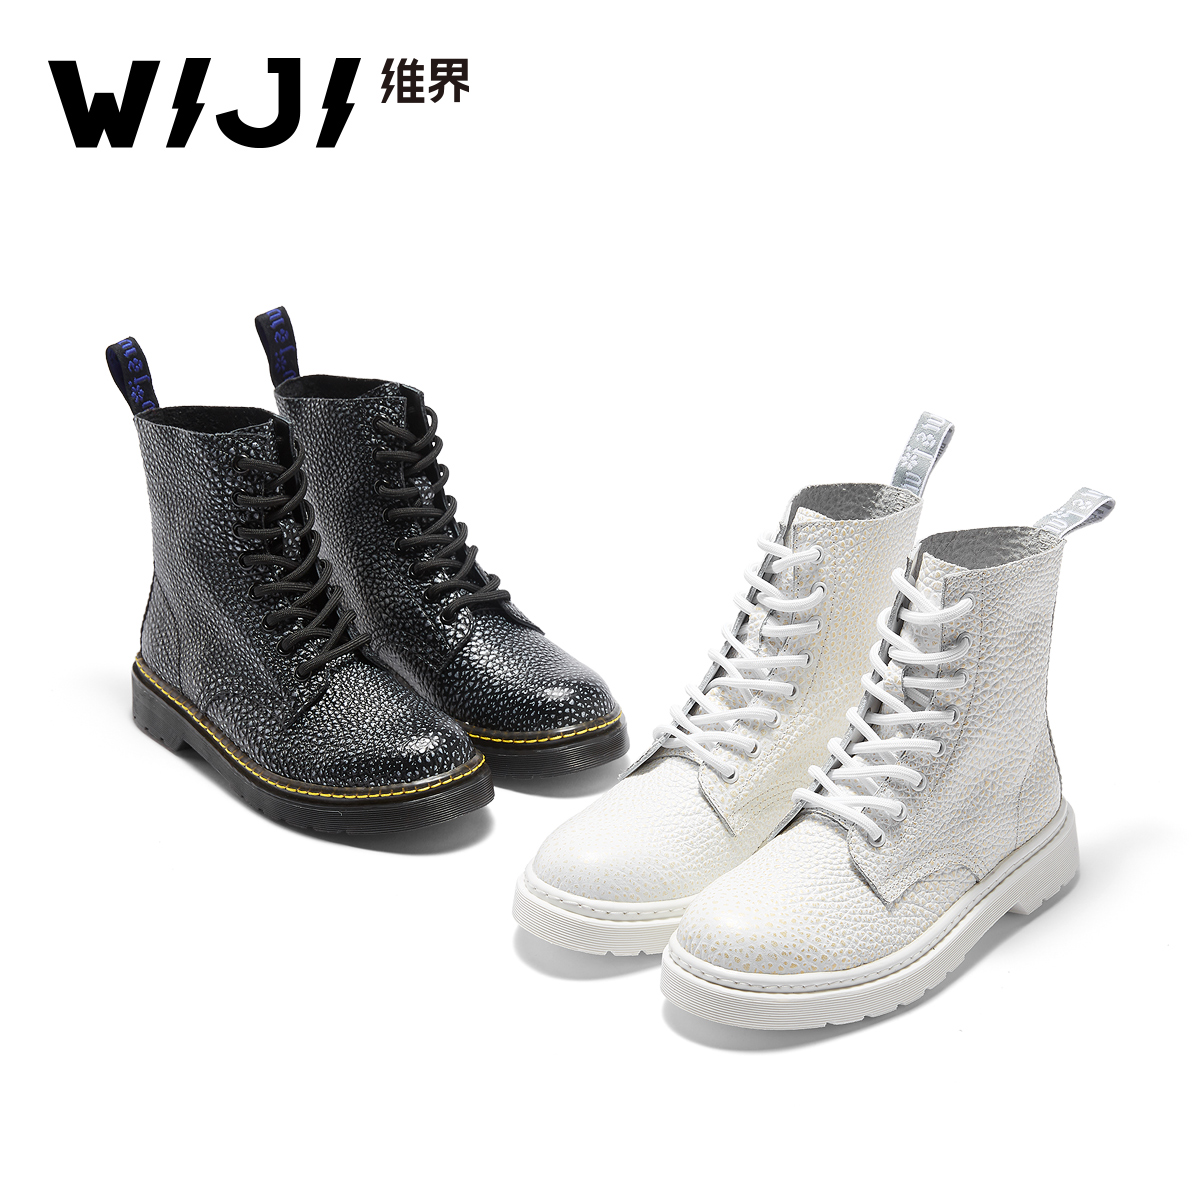 WIJI women's shoes new Korean version of the simple thick with lace fashion high help Martin boots trend personality neutral casual shoes